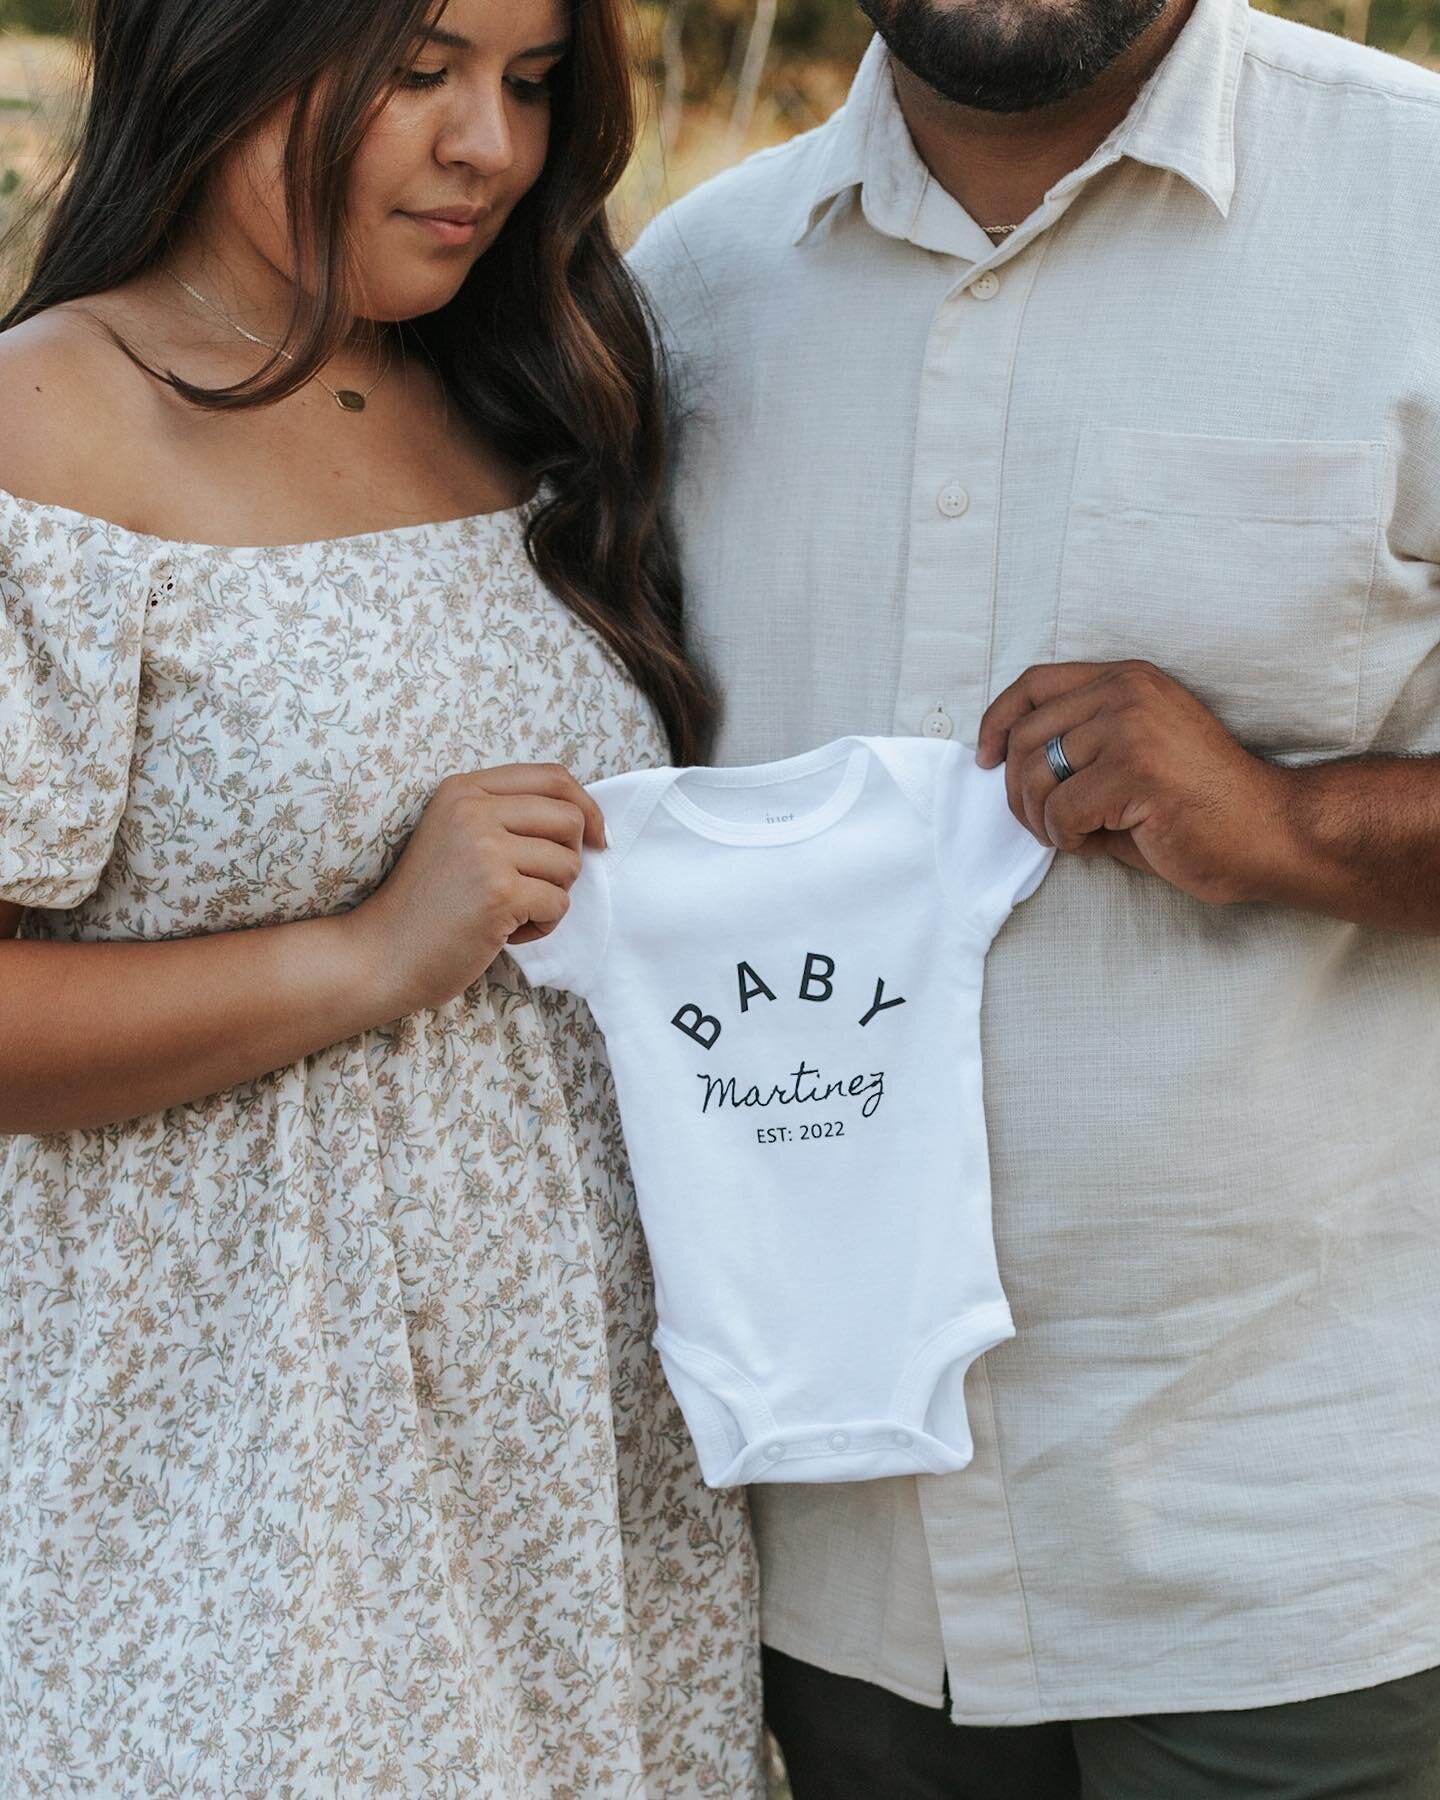 And just like that&hellip; they are parents! Congratulations on this new journey! @cindyyymartinezz @jesus.mtz17 #parenthood
.
.
.
.
Tags
#moments_of_mom #simplejoys #uniteinmotherhood #momlife #parenthood_unveiled #parenthood_moments #posttheordinar